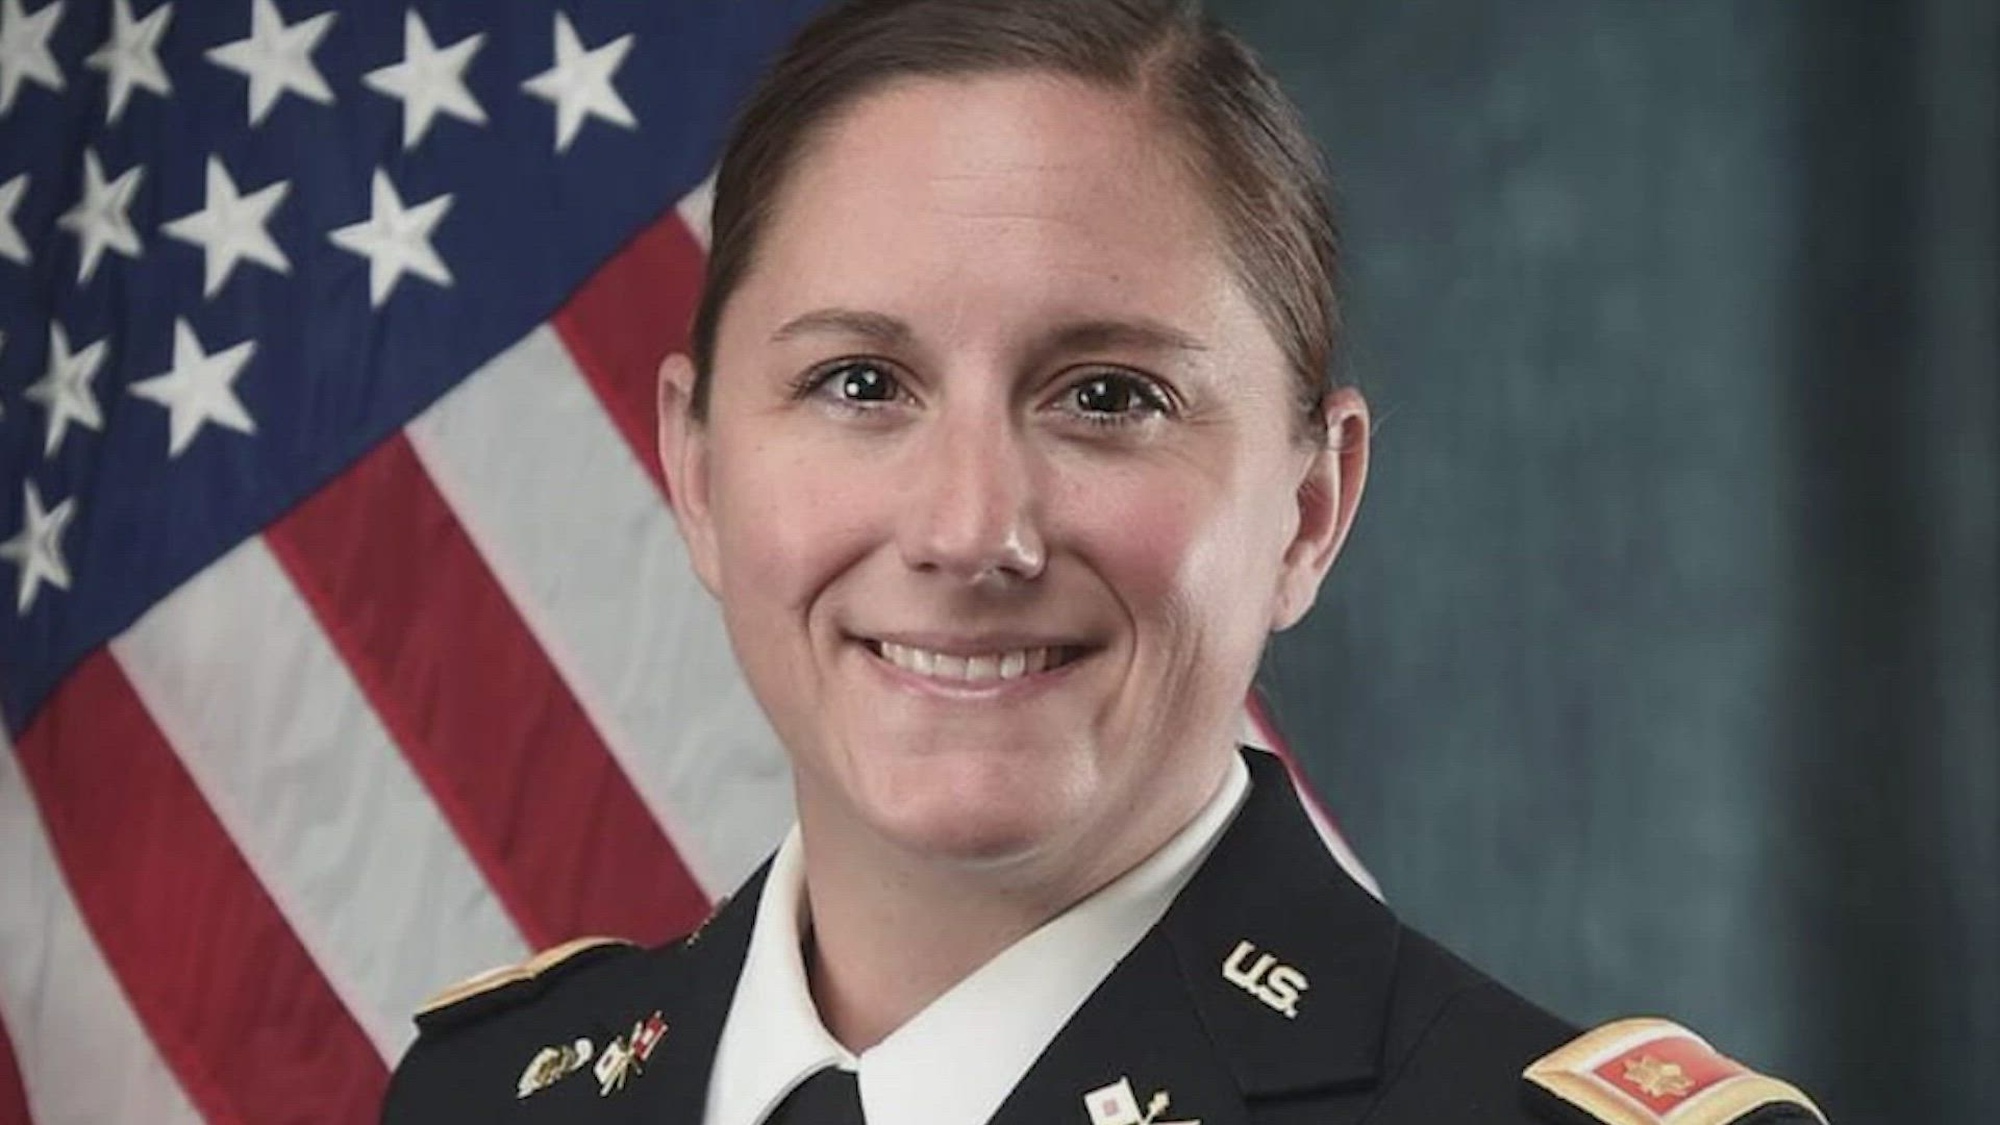 Maj. Kristin Wudtke, Headquarters and Headquarters Company Commander, 85th U.S. Army Reserve Support Command, shares her story of service and why she serves.
(U.S. Army Reserve video by Staff Sgt. Erika Whitaker)